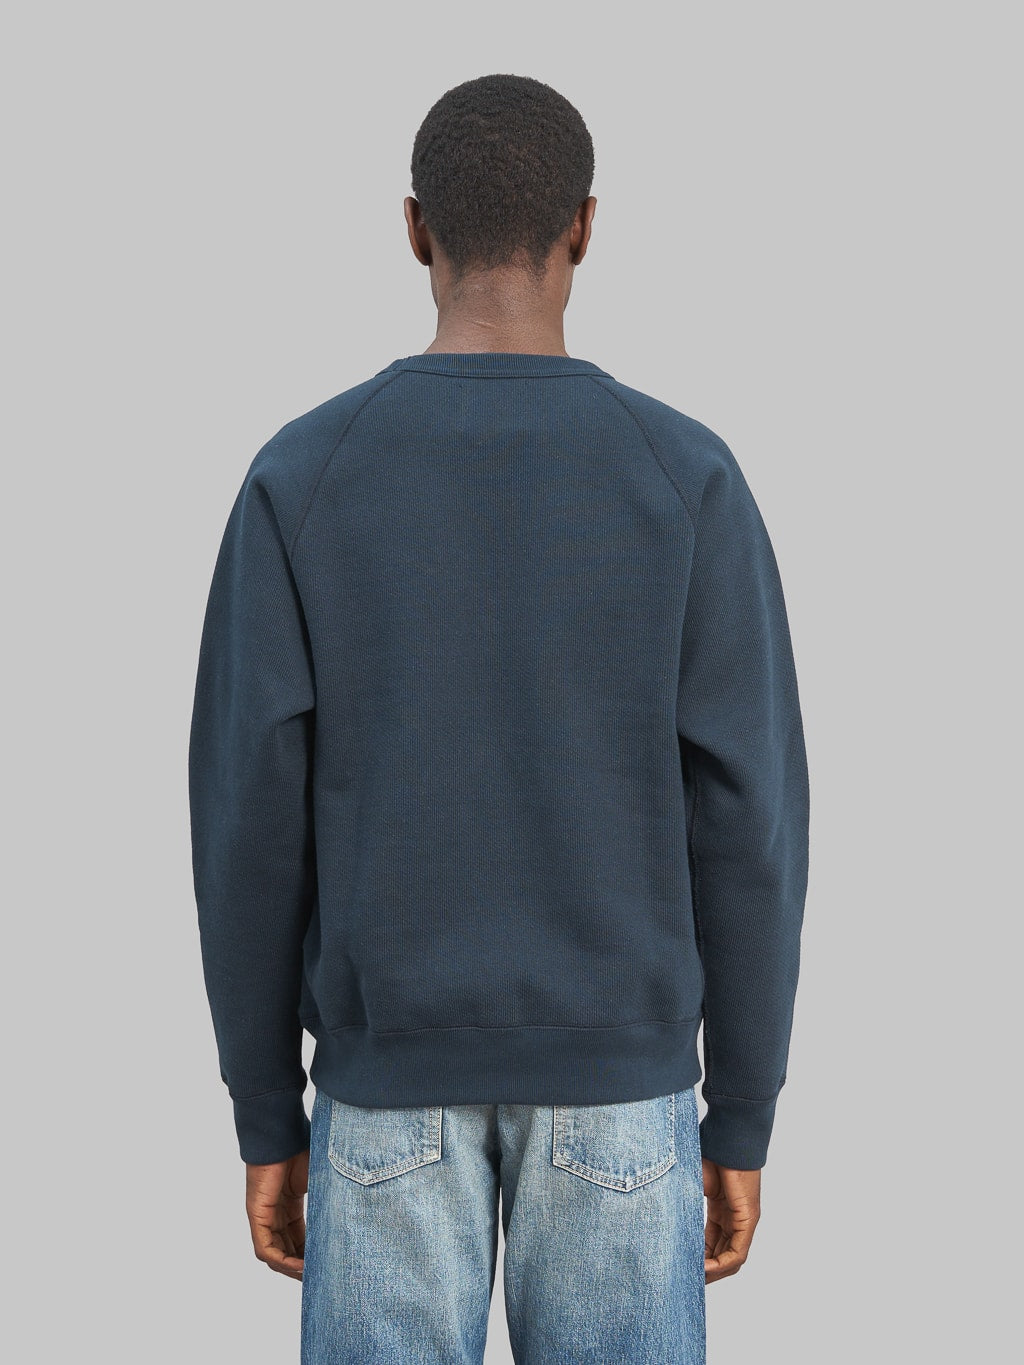 Wonder Looper Pullover Crewneck 701gsm Double Heavyweight French Terry